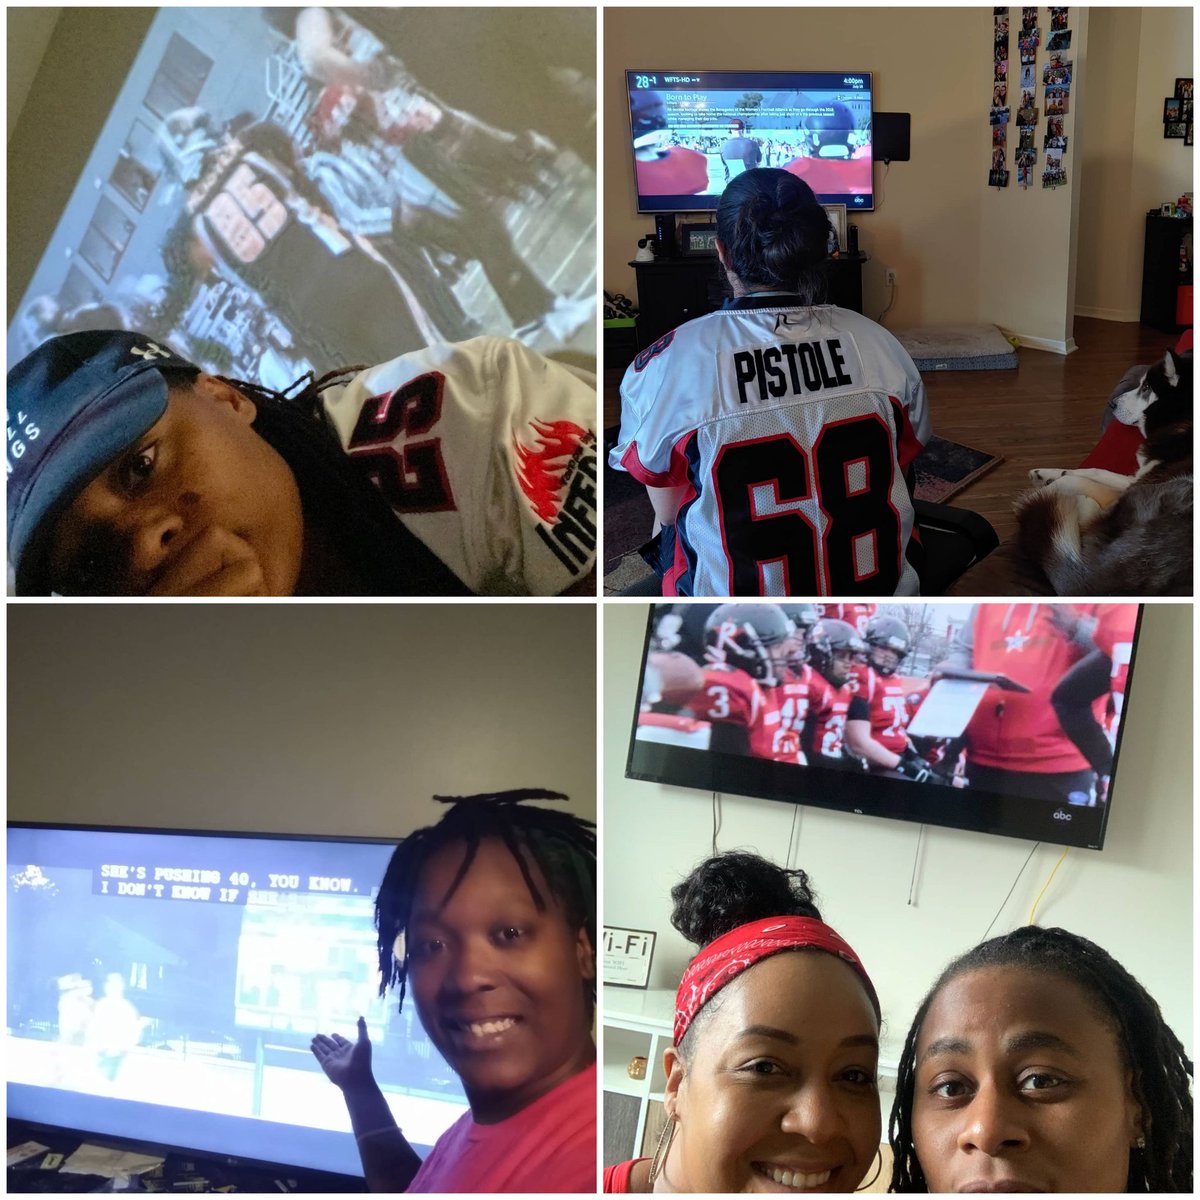 What a great way to spend a Saturday afternoon! Watching Born To Play on ABC! Makes us all ready to take the field! #BornToPlay #wfafootball #womensfootball #womeninsports